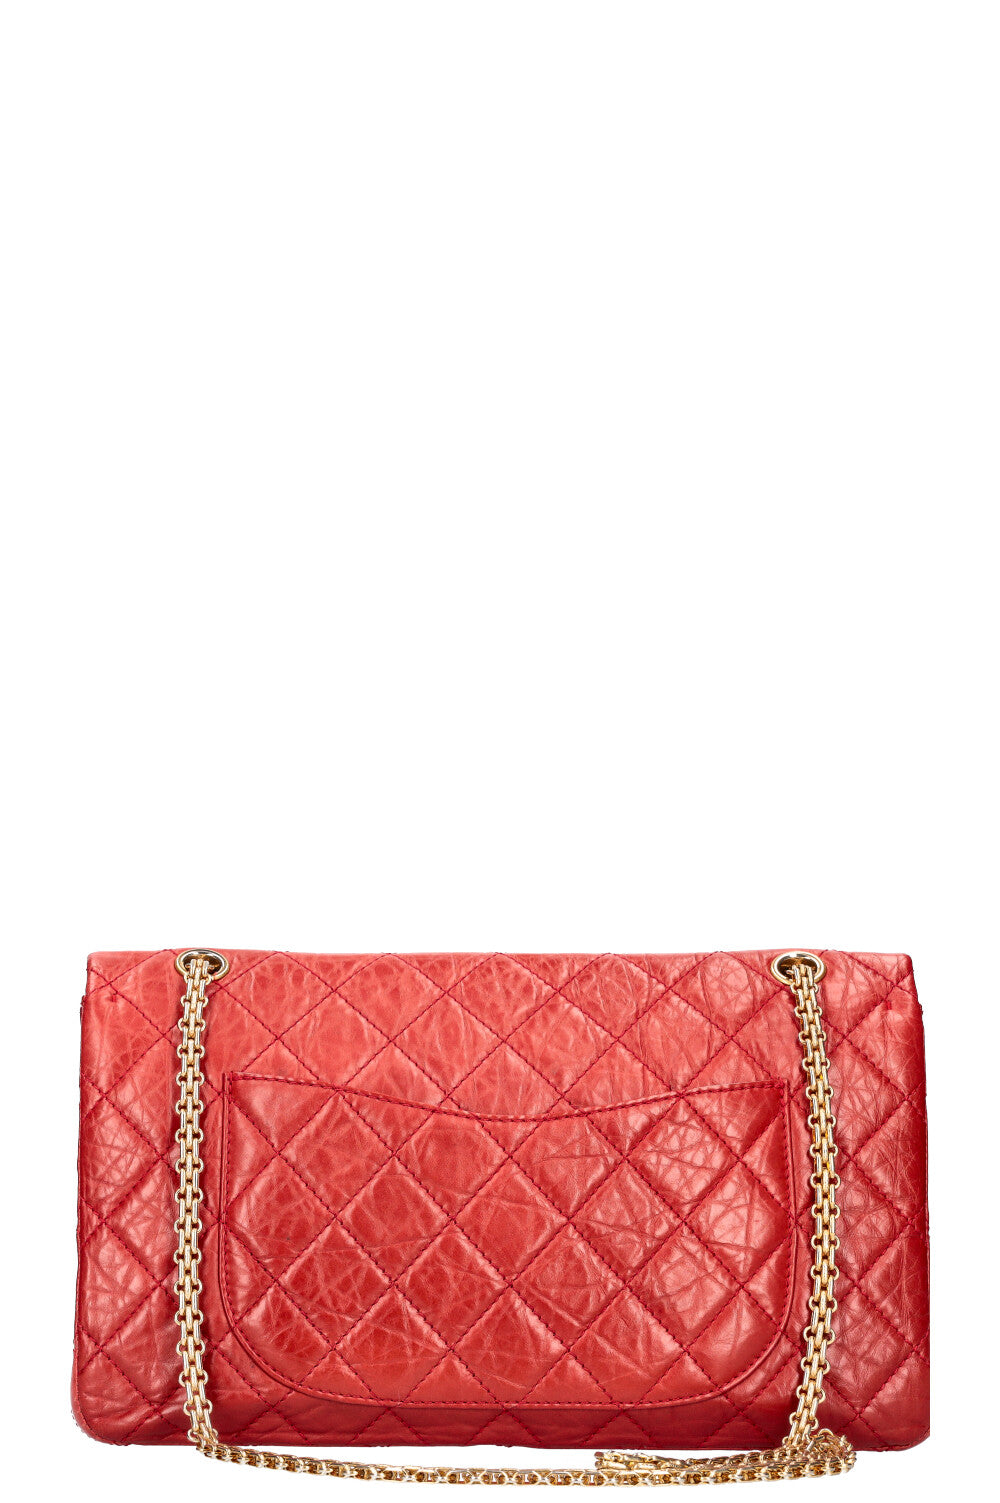 CHANEL 2.55 Large Red 2011